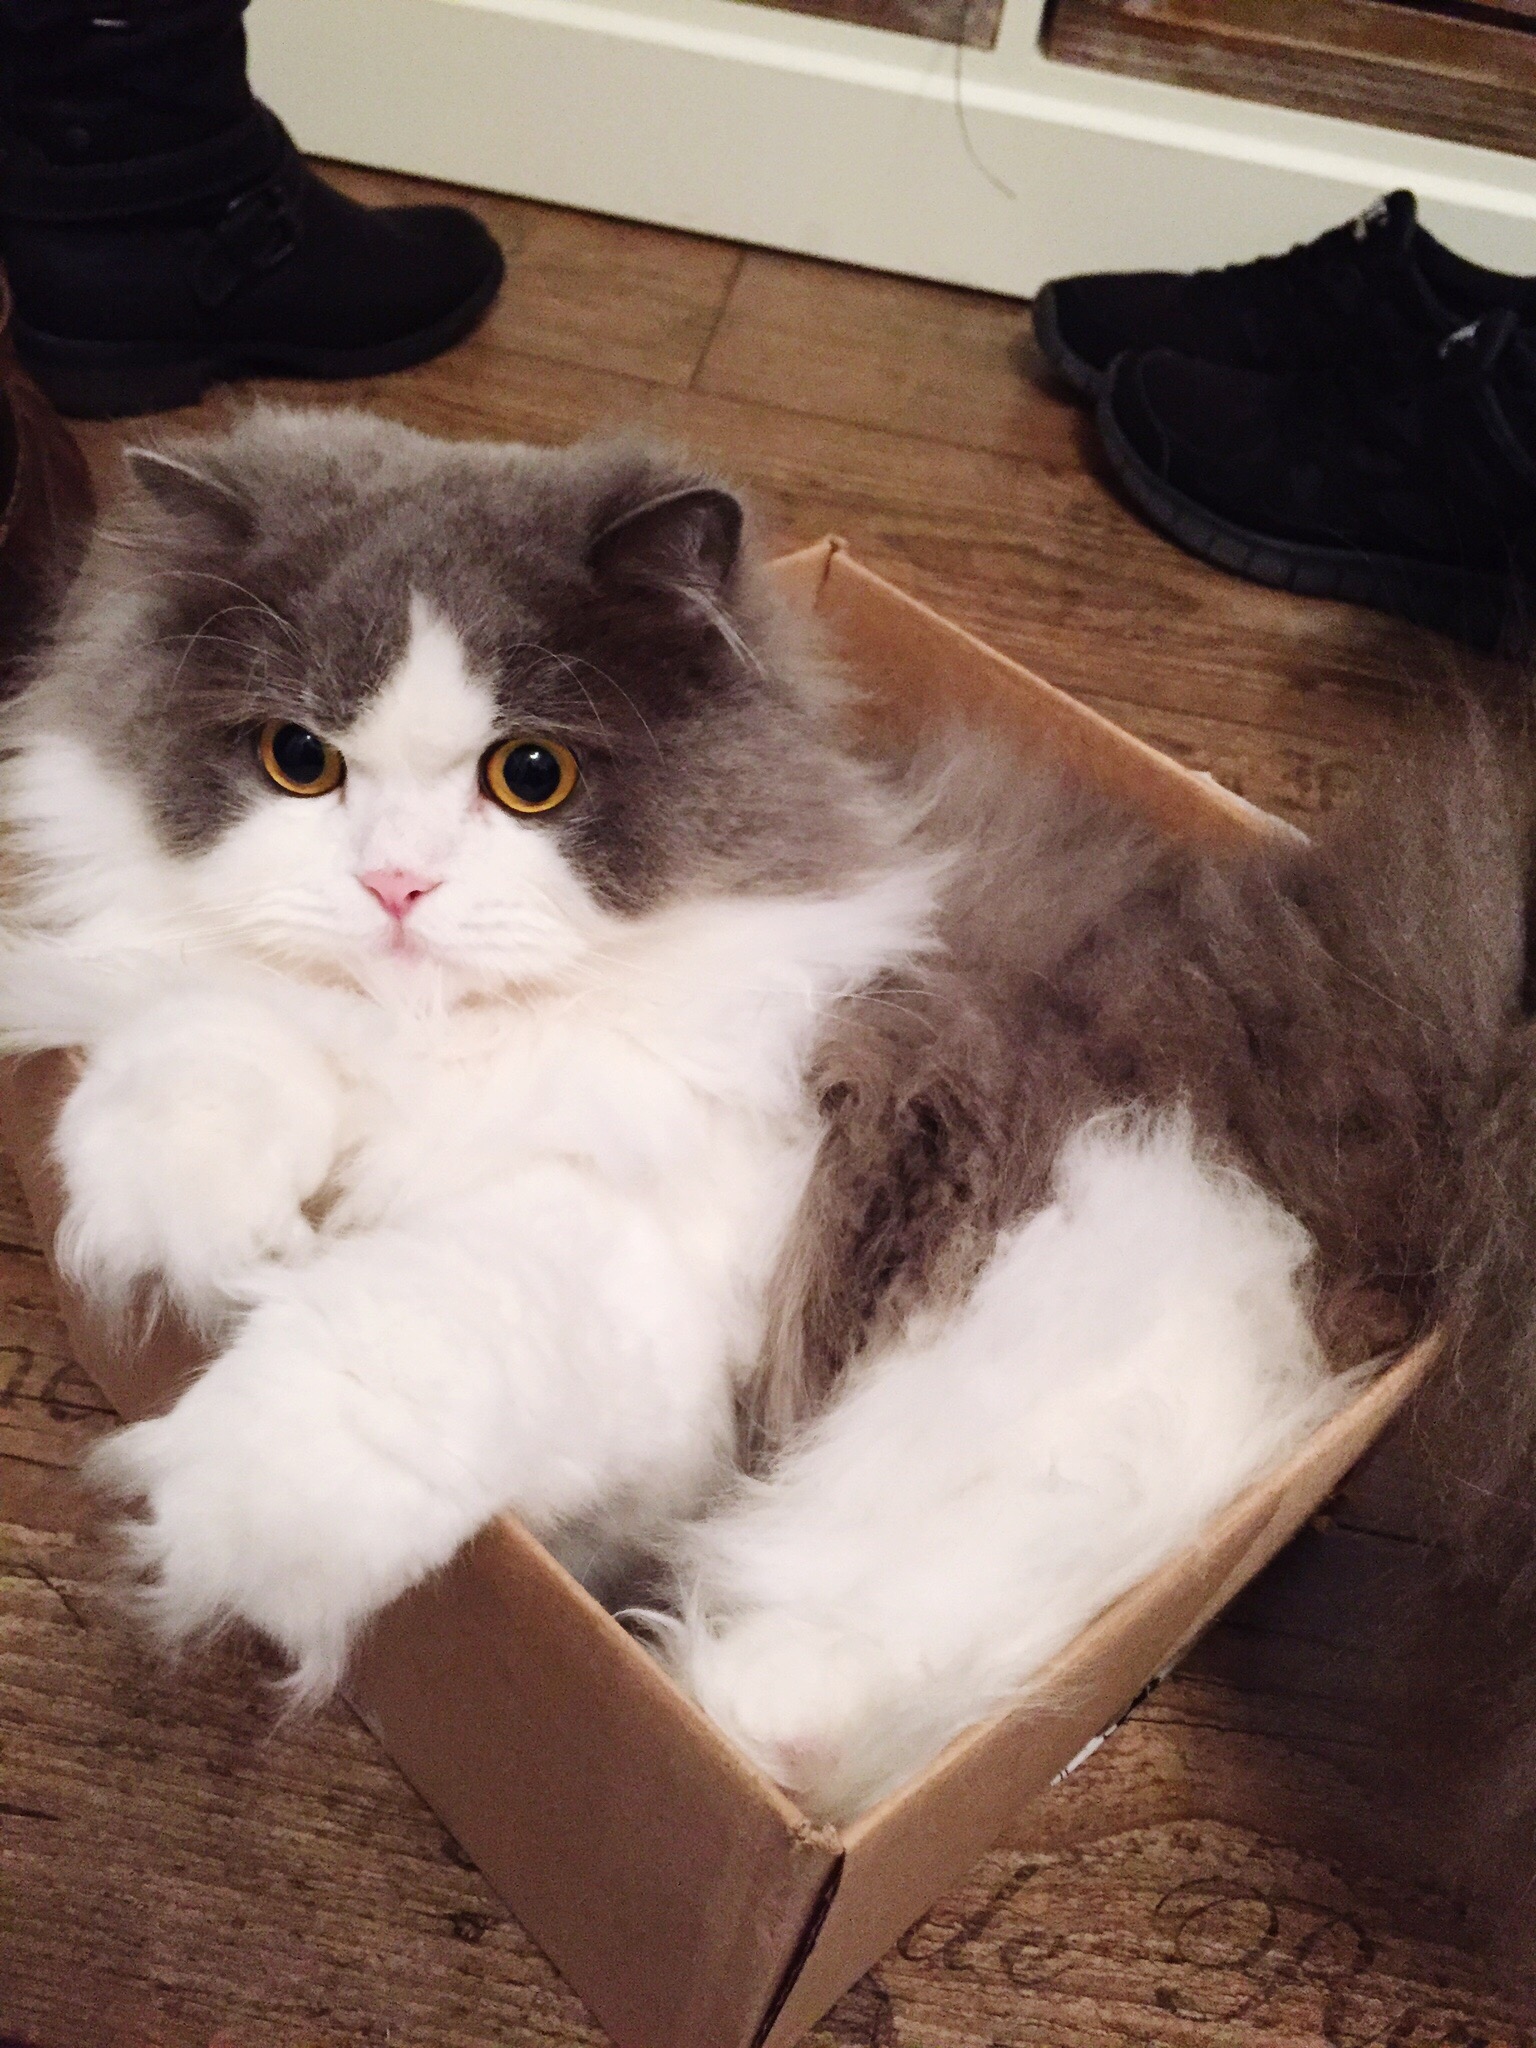 White and gray cat sitting in cardboard box.